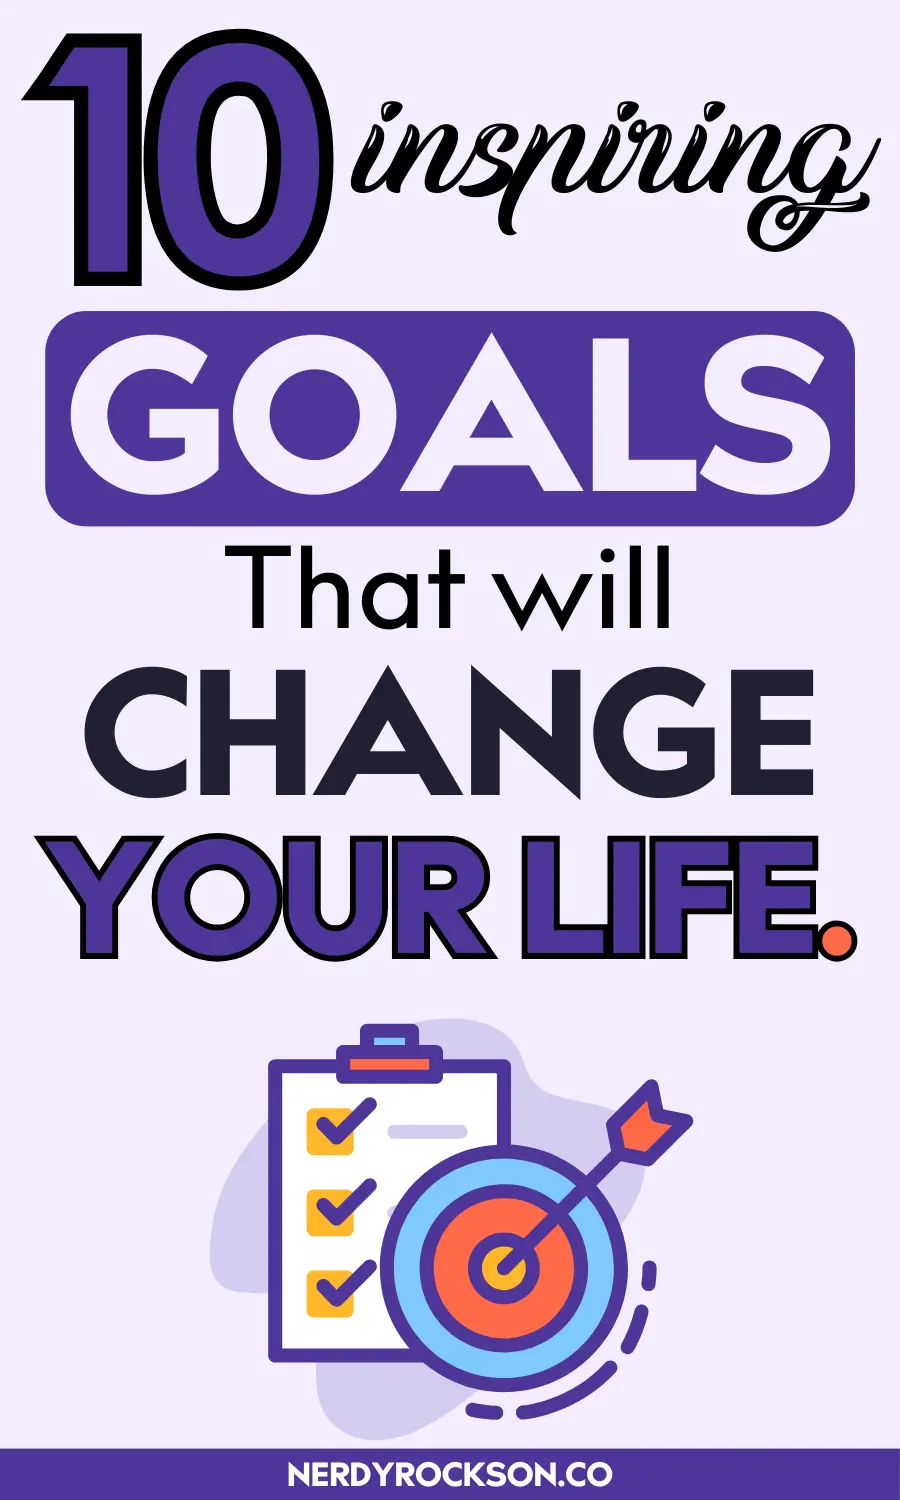 10 Inspiring Goals That Will Change Your Life